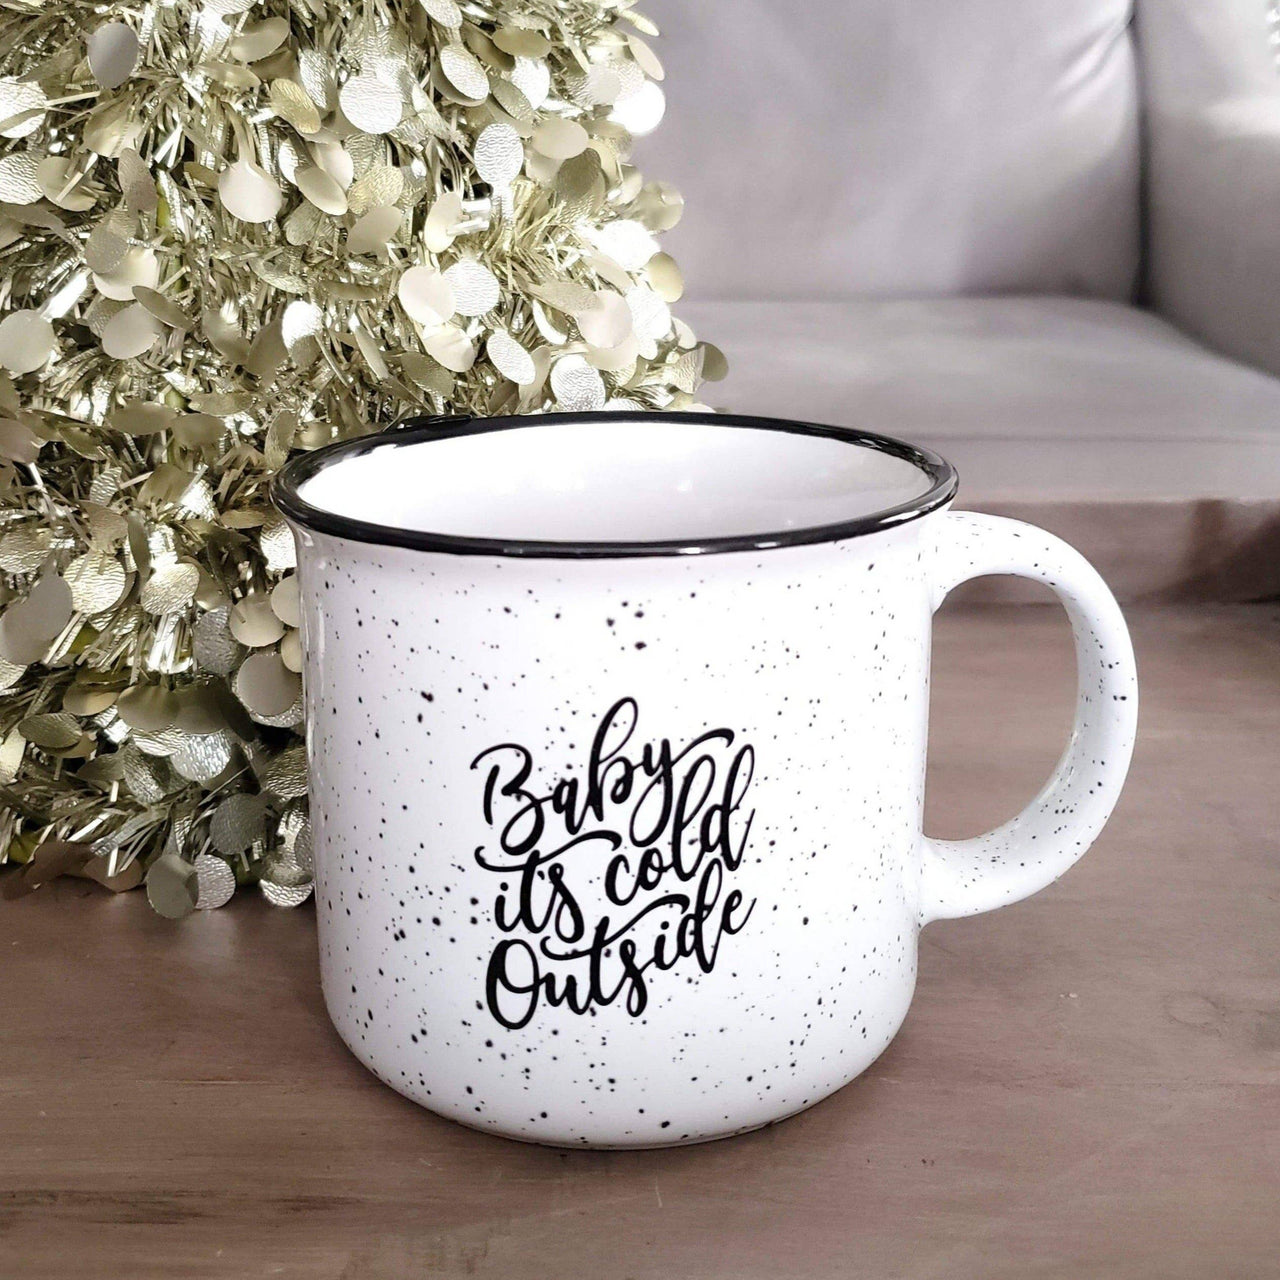 Baby It's Cold Outside Campfire Mug